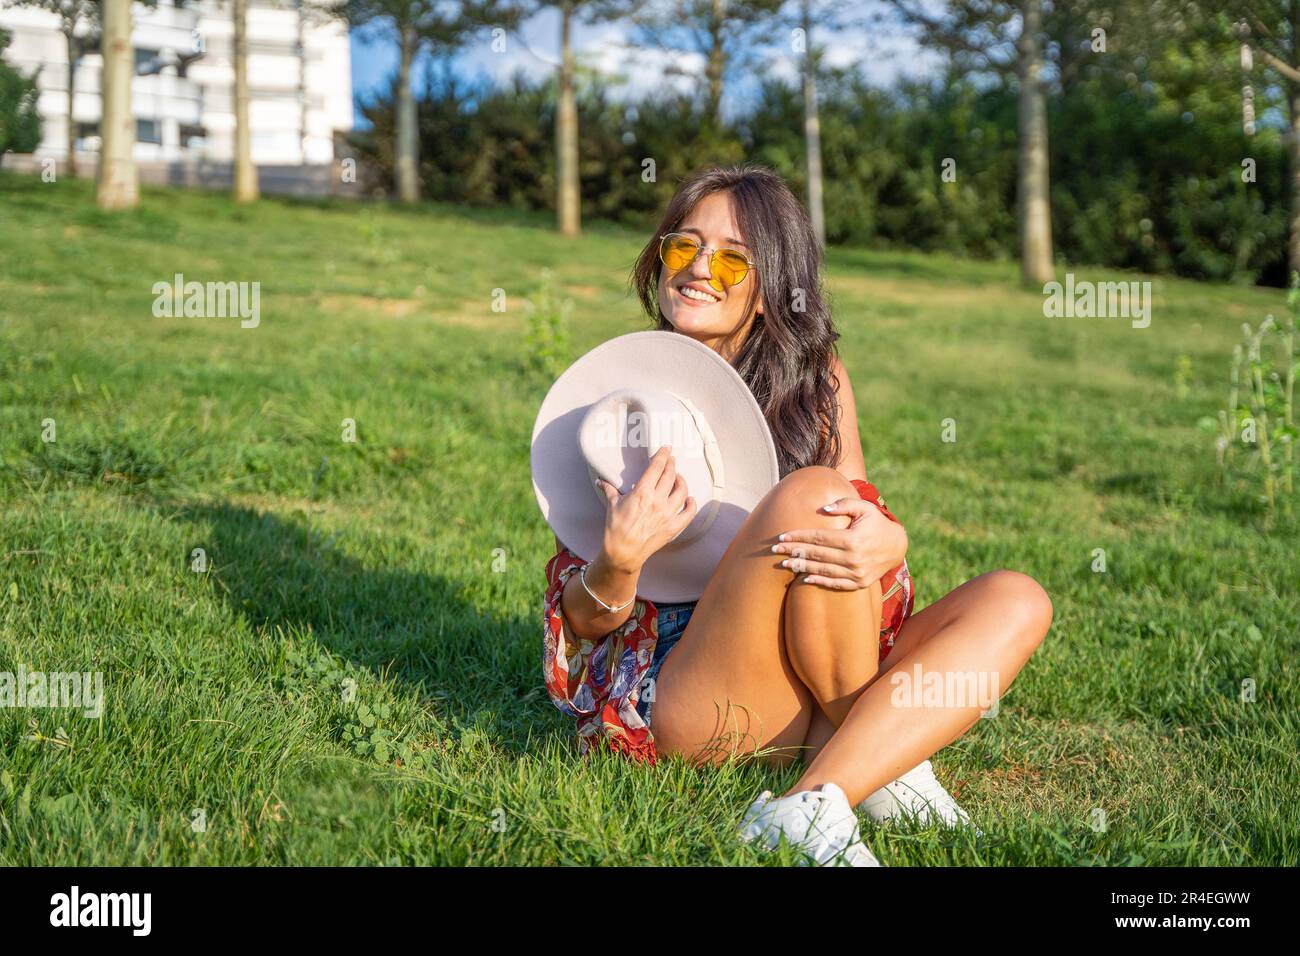 Joyful woman with sunglasses looking at camera and smiling while sitting outdoors on a green grass in a park. Stock Photo